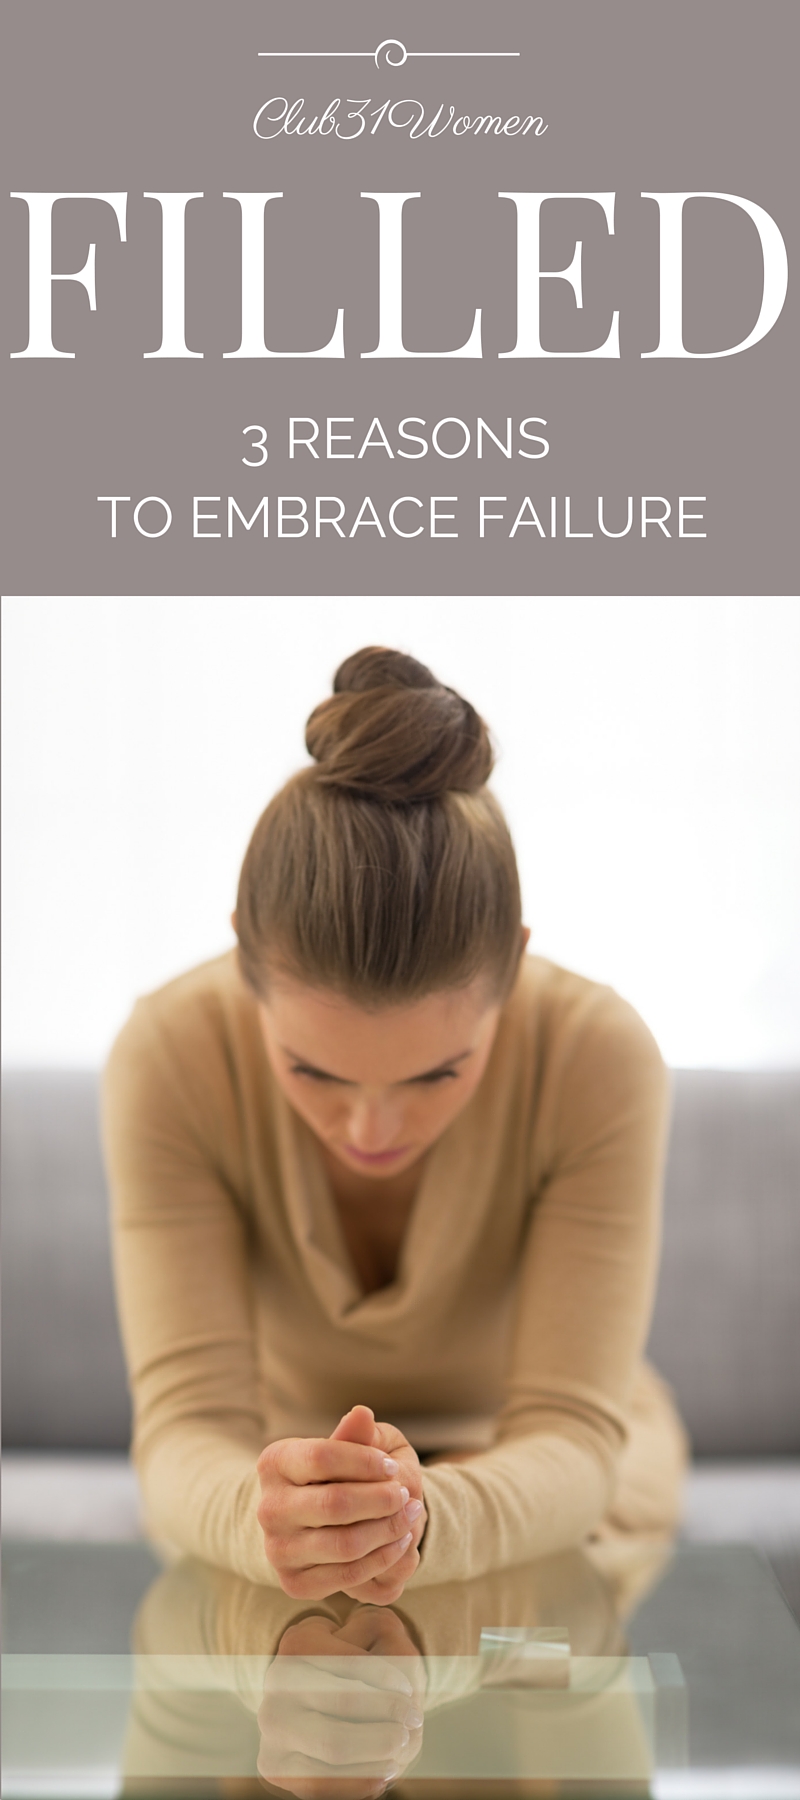 FILLED: 3 Reasons to Embrace Failure